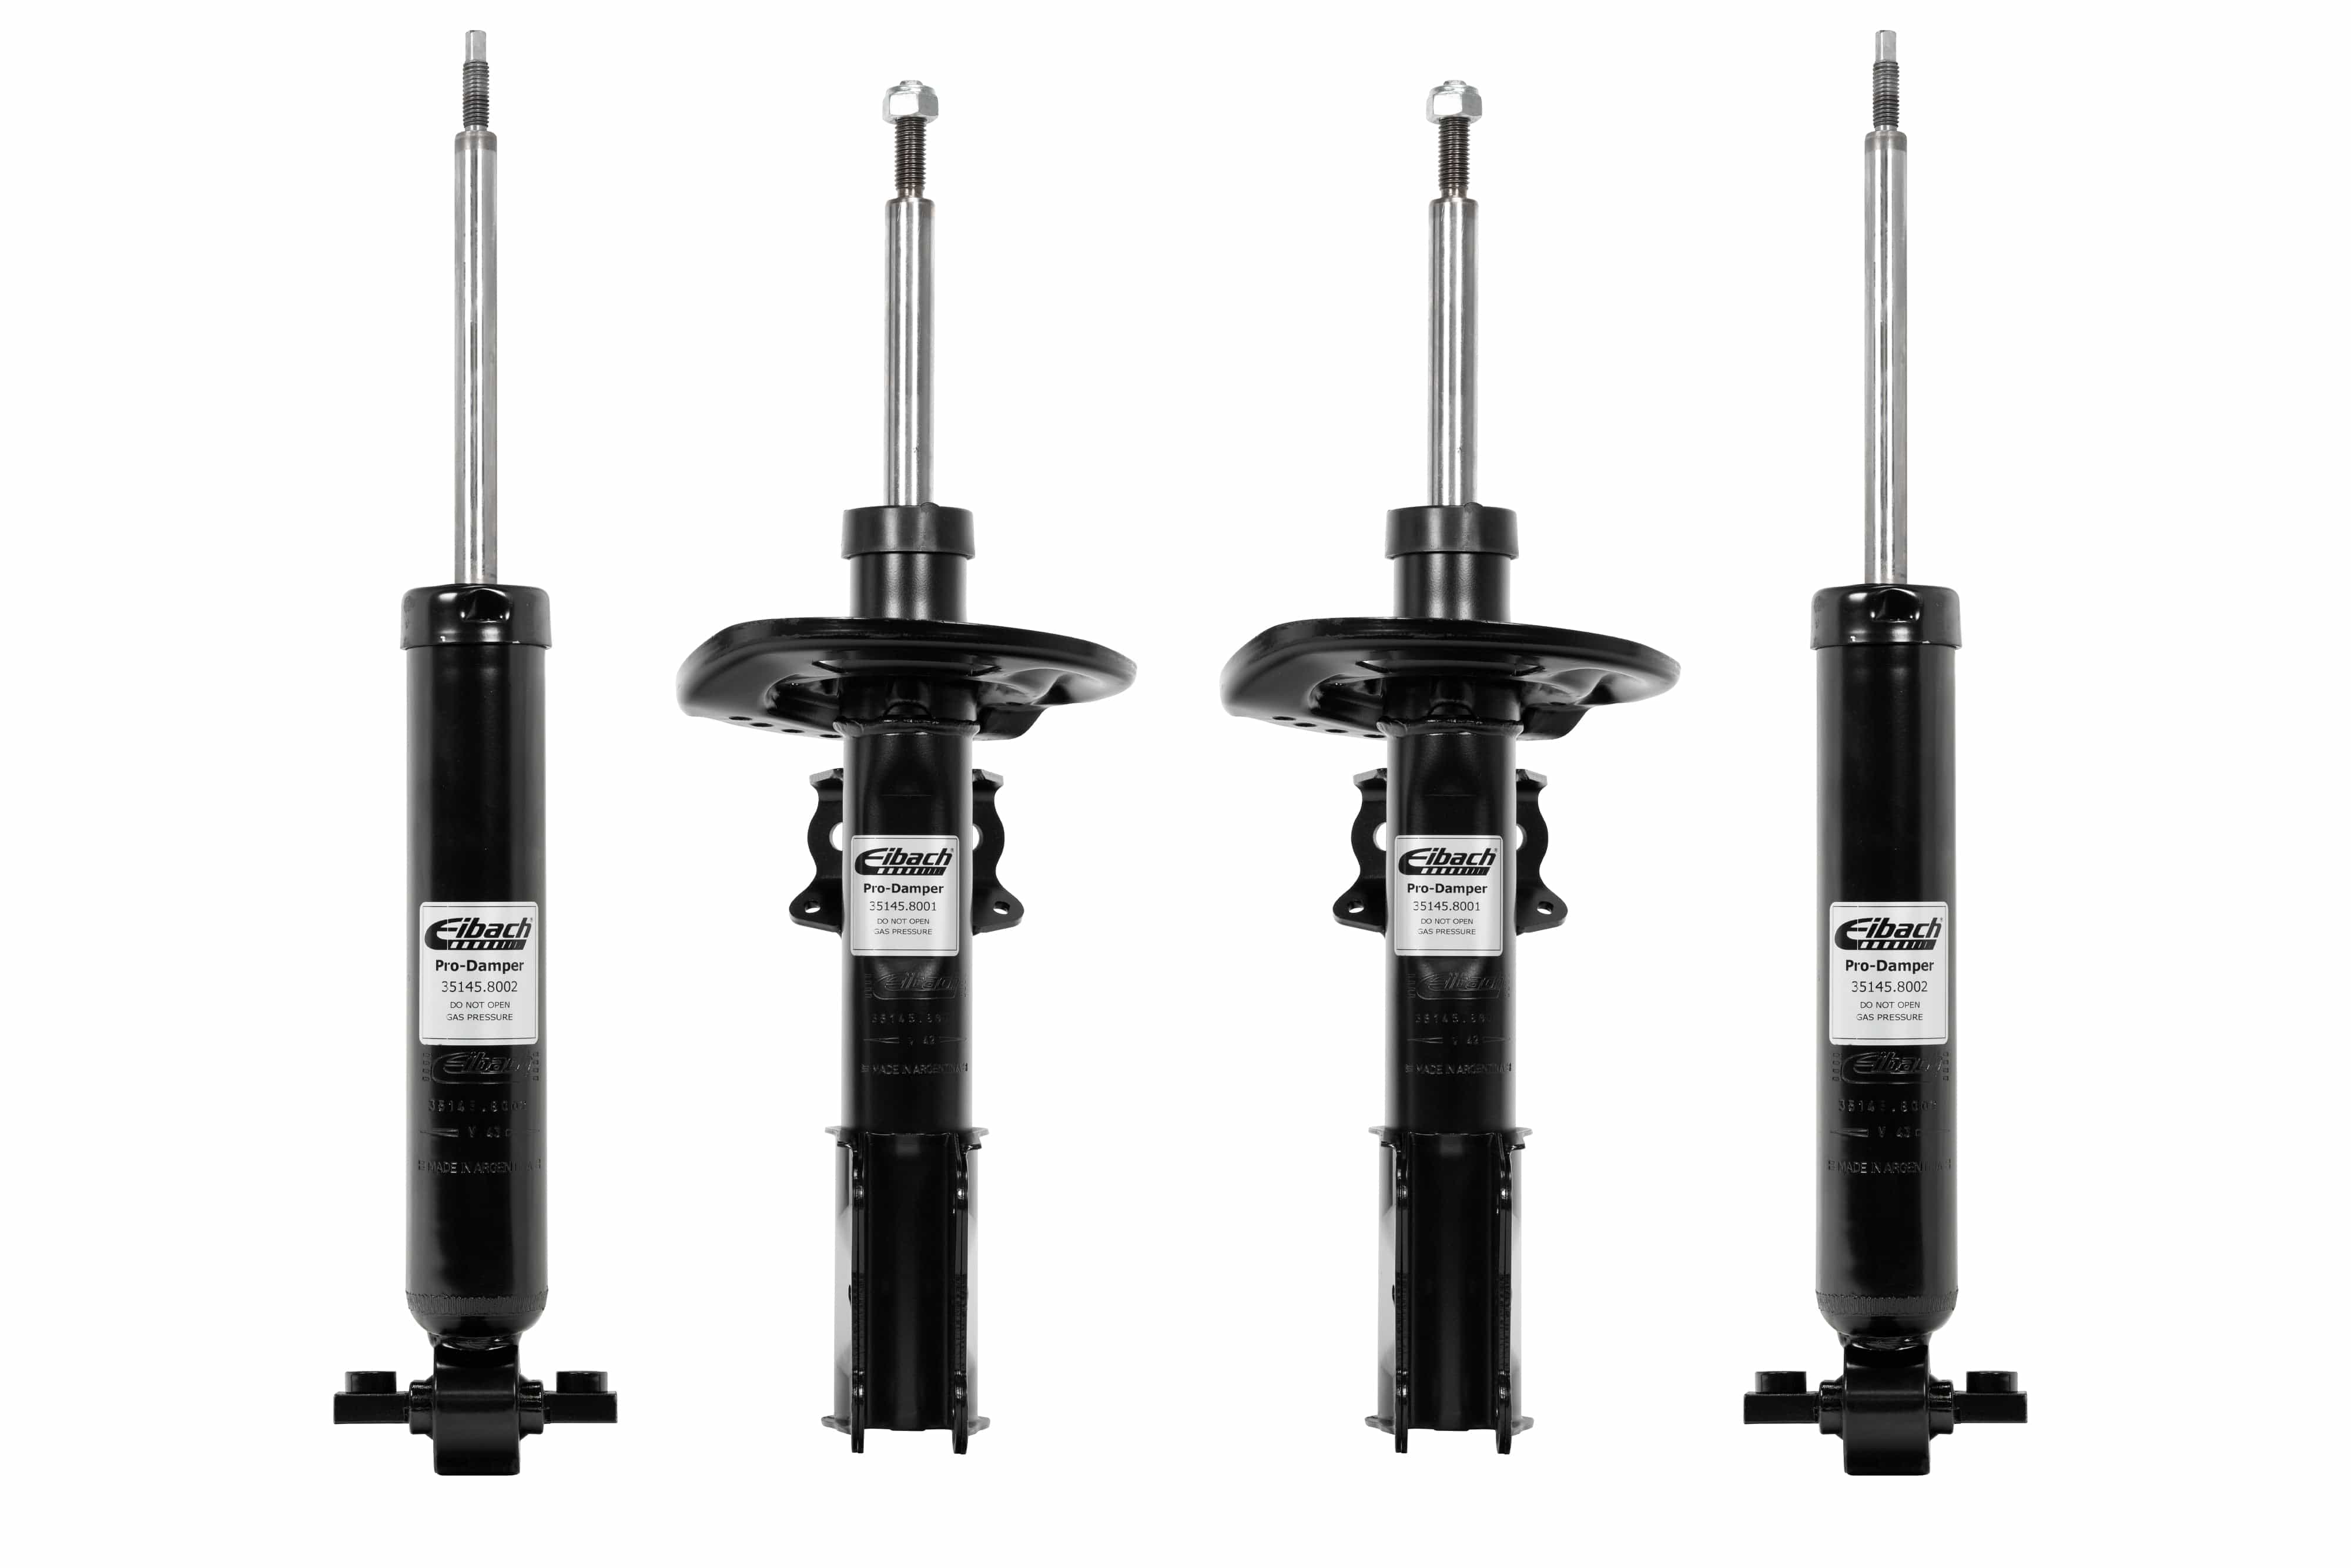 Eibach PRO-DAMPER Shocks for 2015-2017 Ford Mustang GT Coupe (S550)